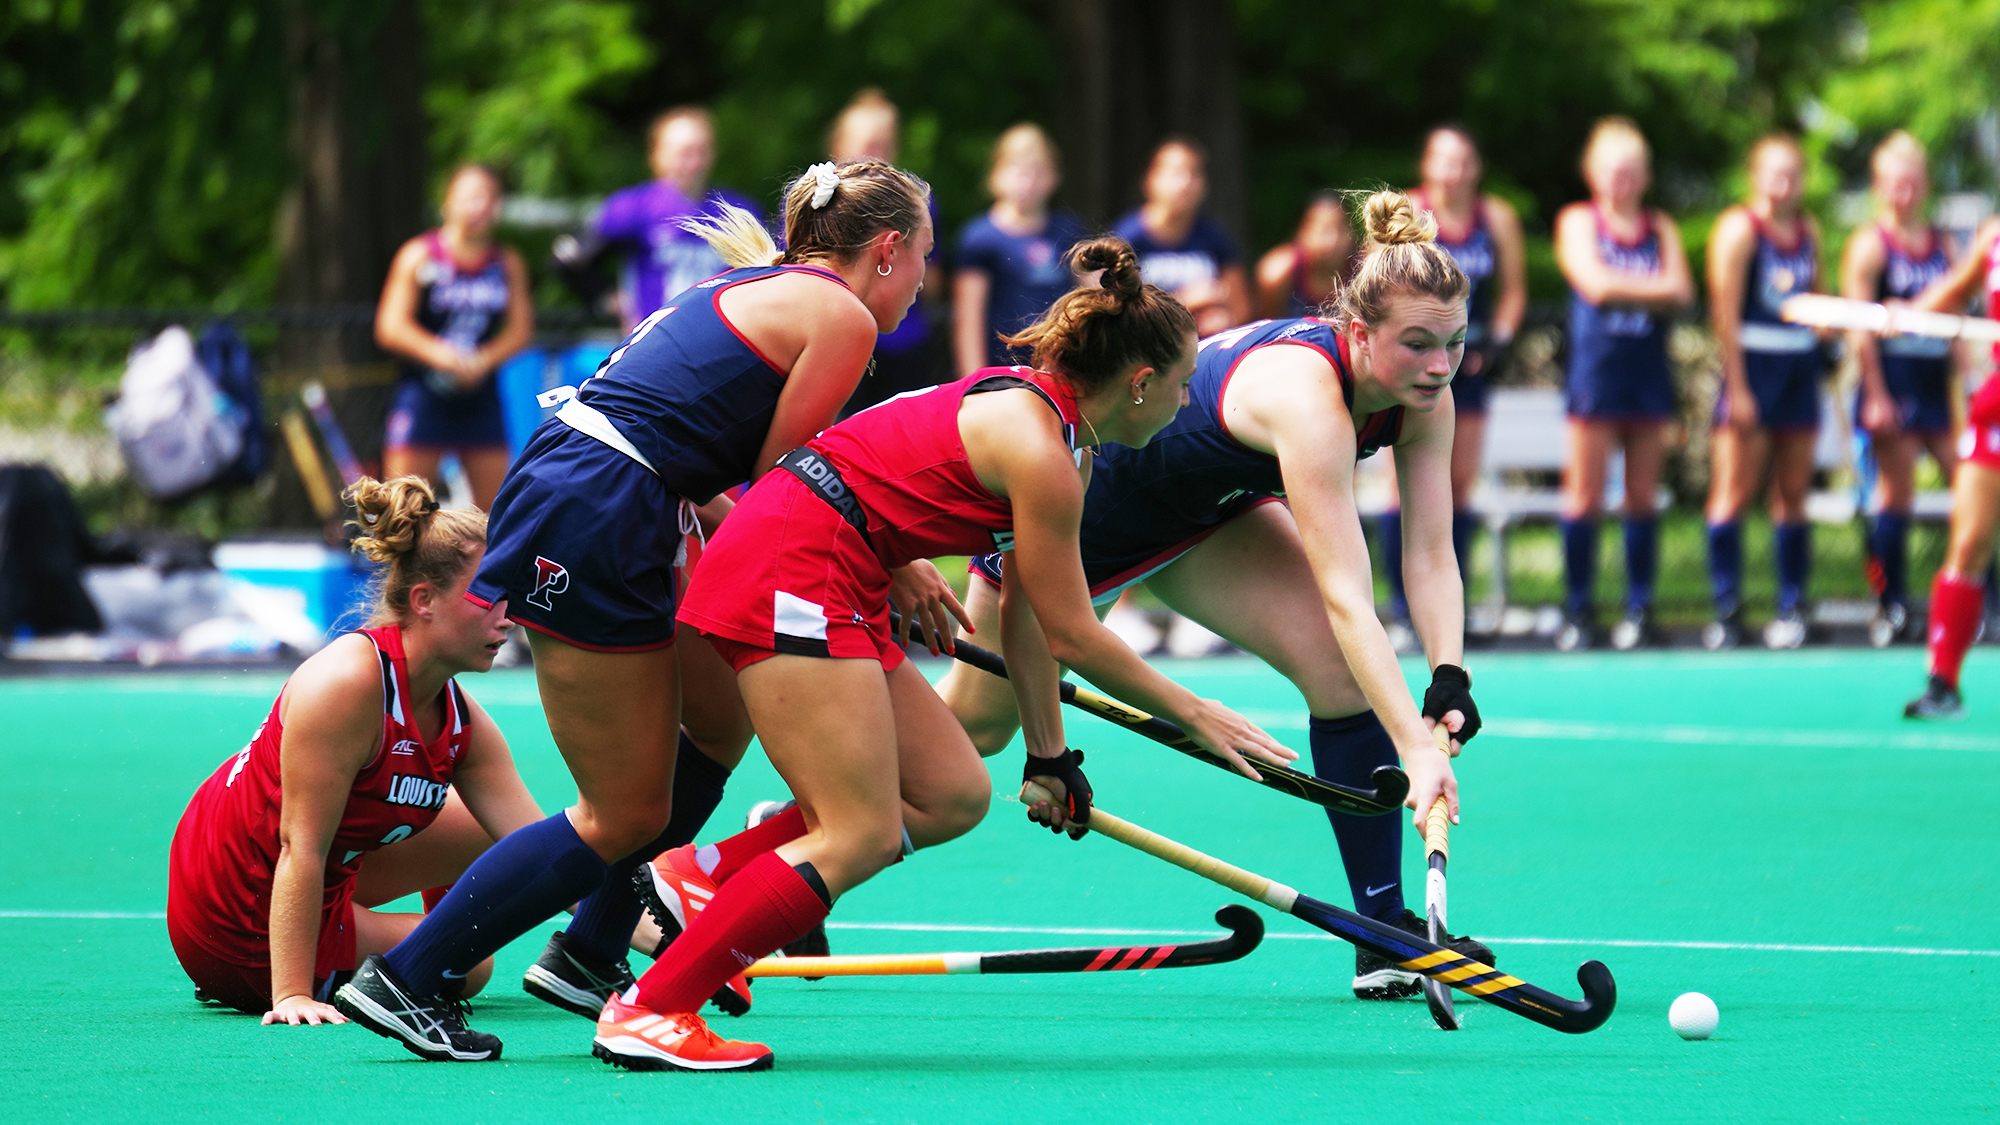 Allison Kuzyk fights for the ball with her stick in a game against Louisville.